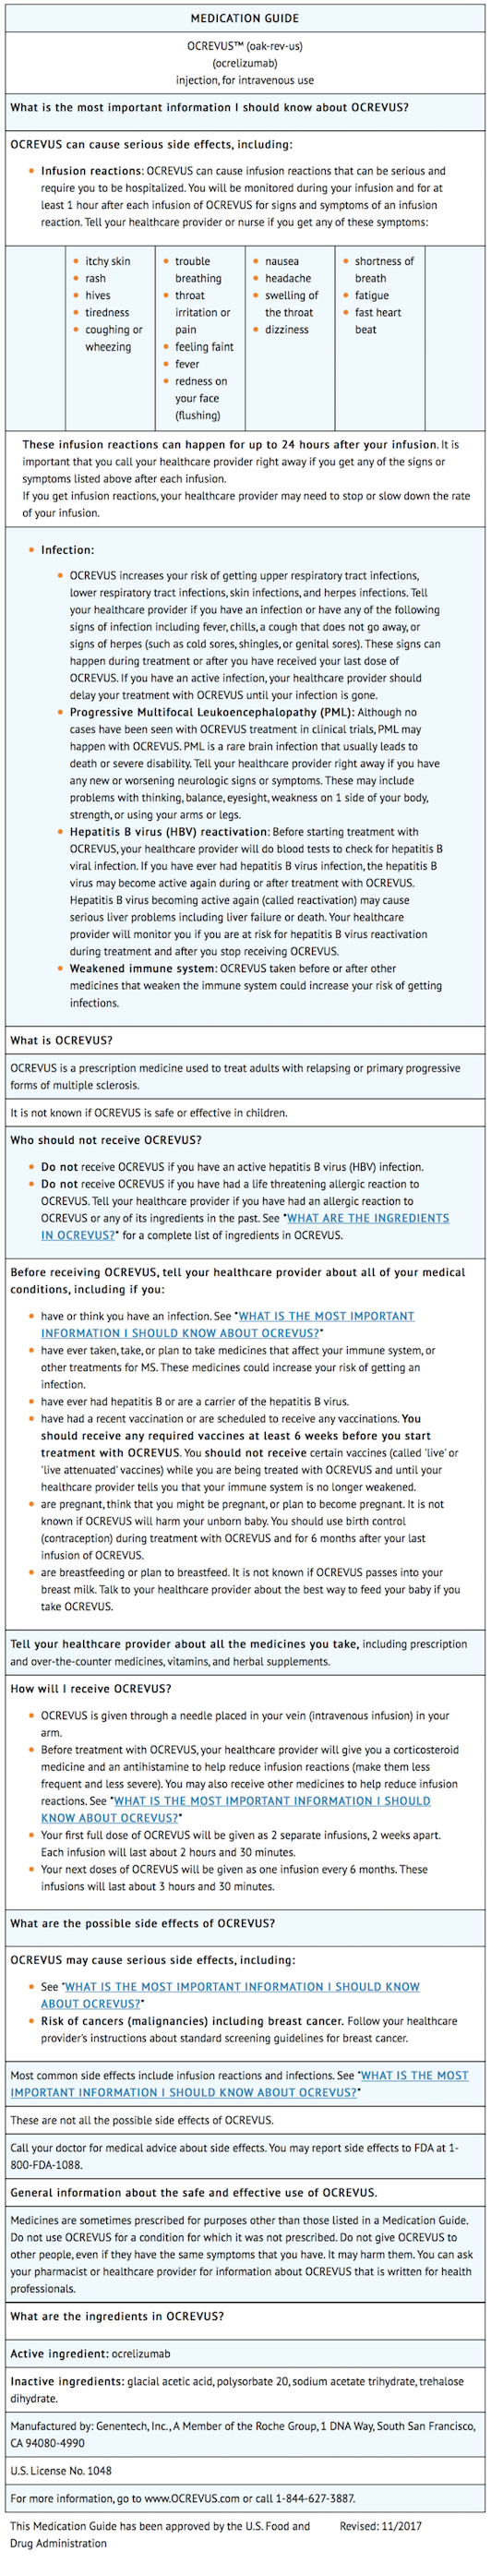 File:Ocrelizumab Patient Counseling Information 1.png